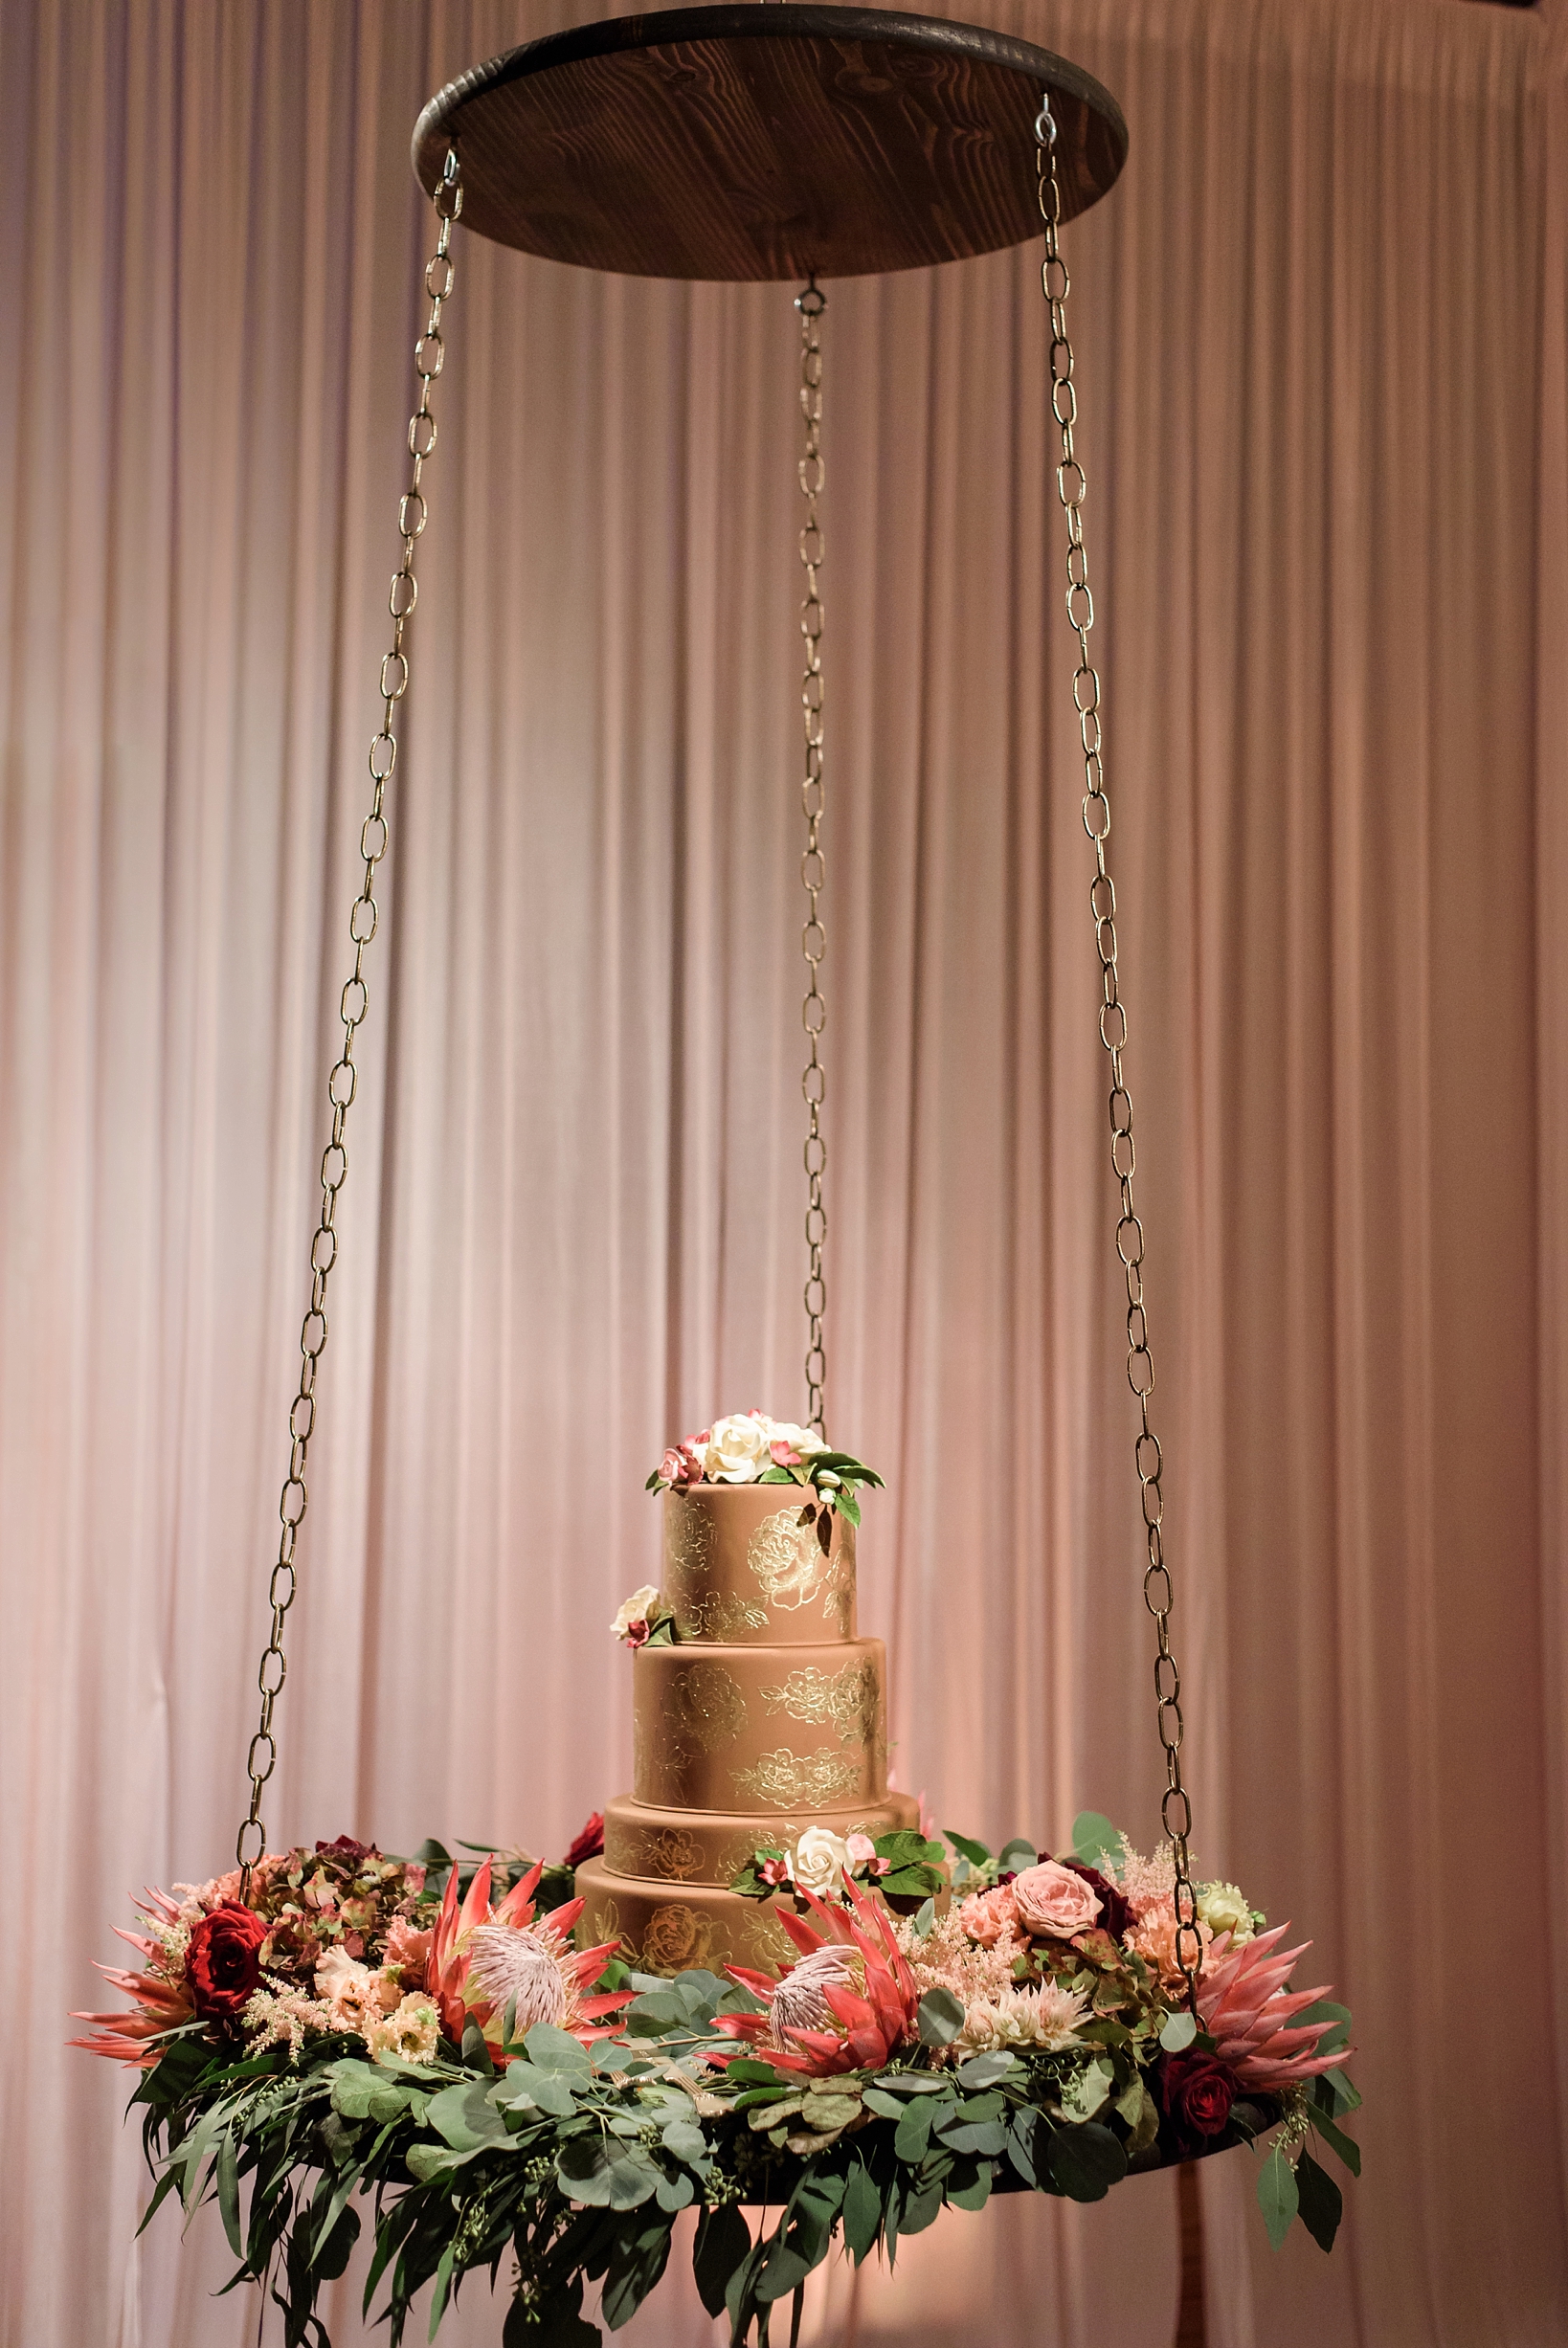 The wedding cake on a swing at the wedding reception